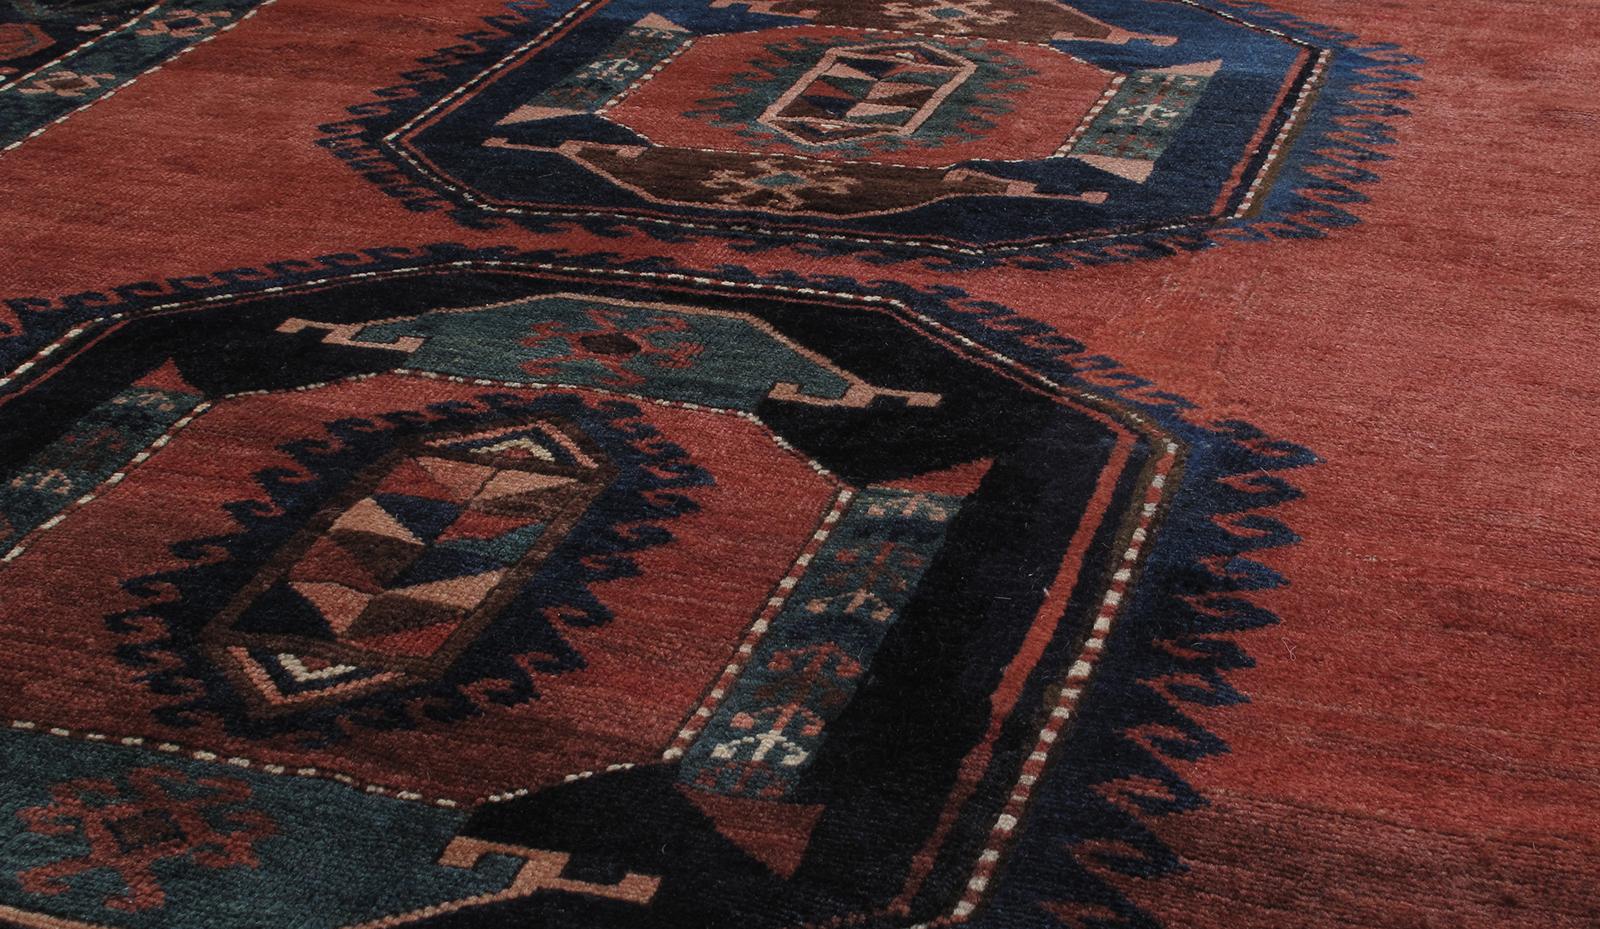 This antique Caucasian tribal rug is from Azerbaijan, a country located in the south Caucasus region. It is constructed of 100% handspun wool and natural dyes. This rug features a bold, articulated geometric pattern, which is a very distinctive